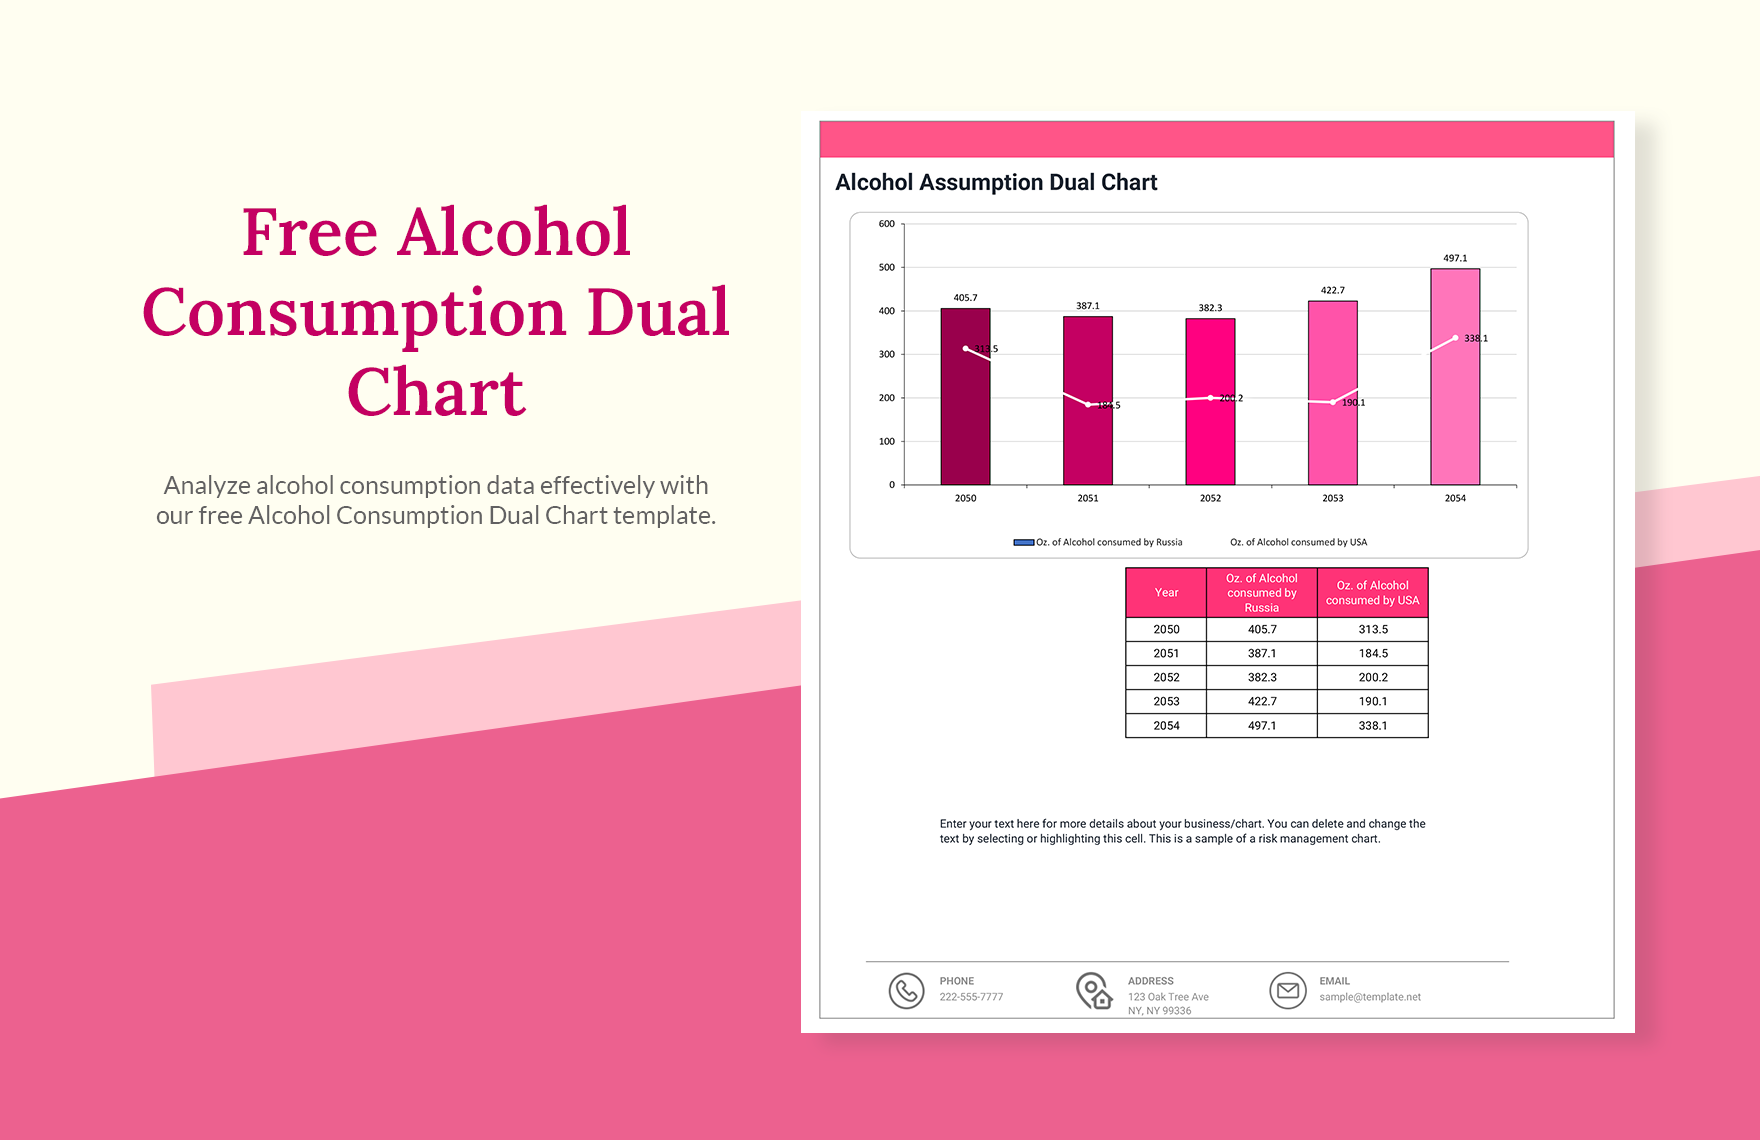 Free Alcohol Consumption Dual Chart